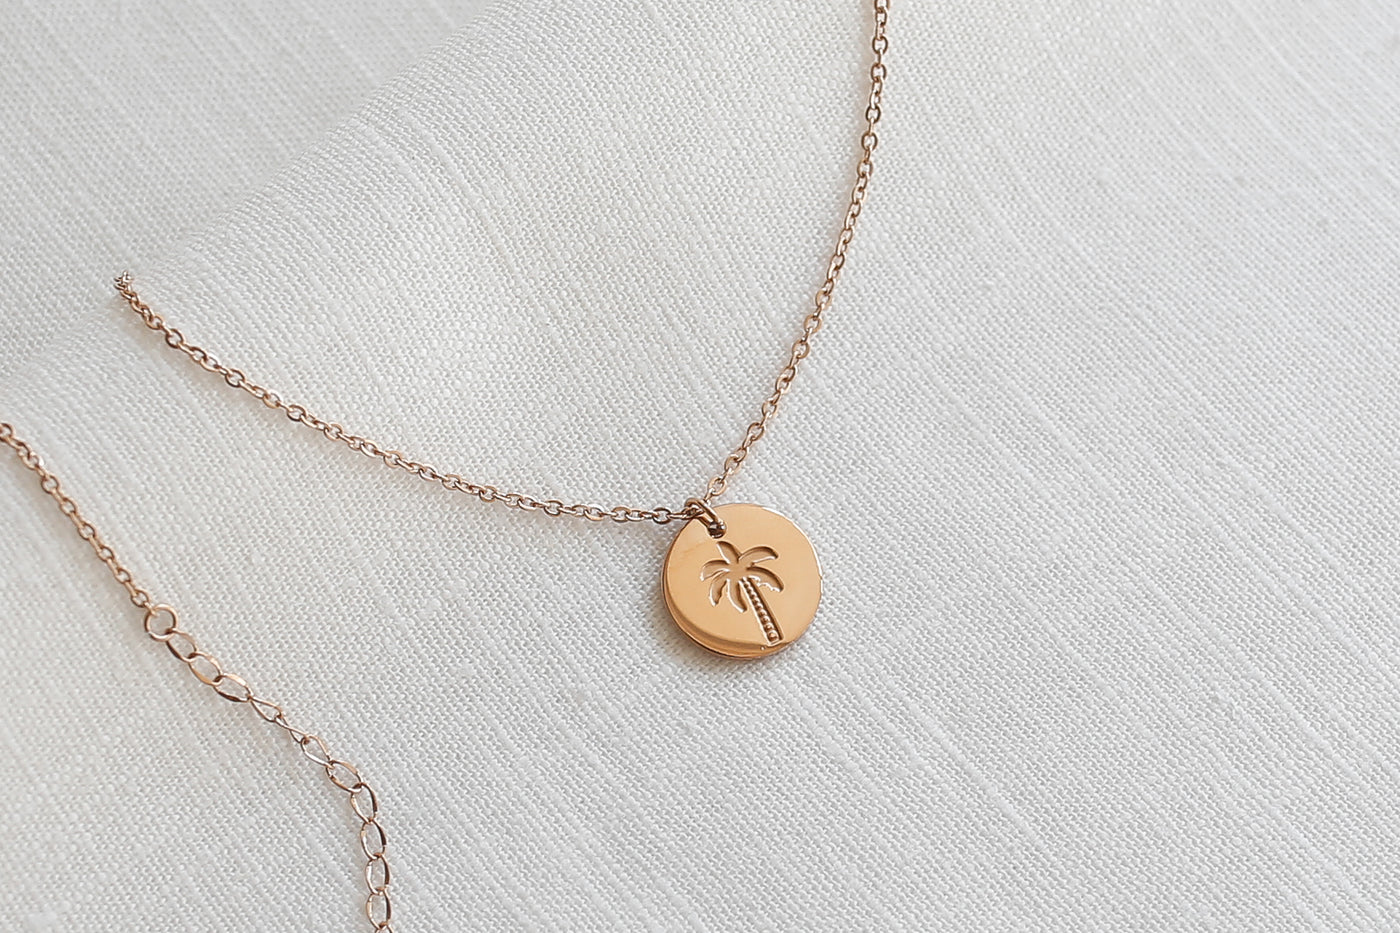 Necklace with palm pendant and Happiness greeting card